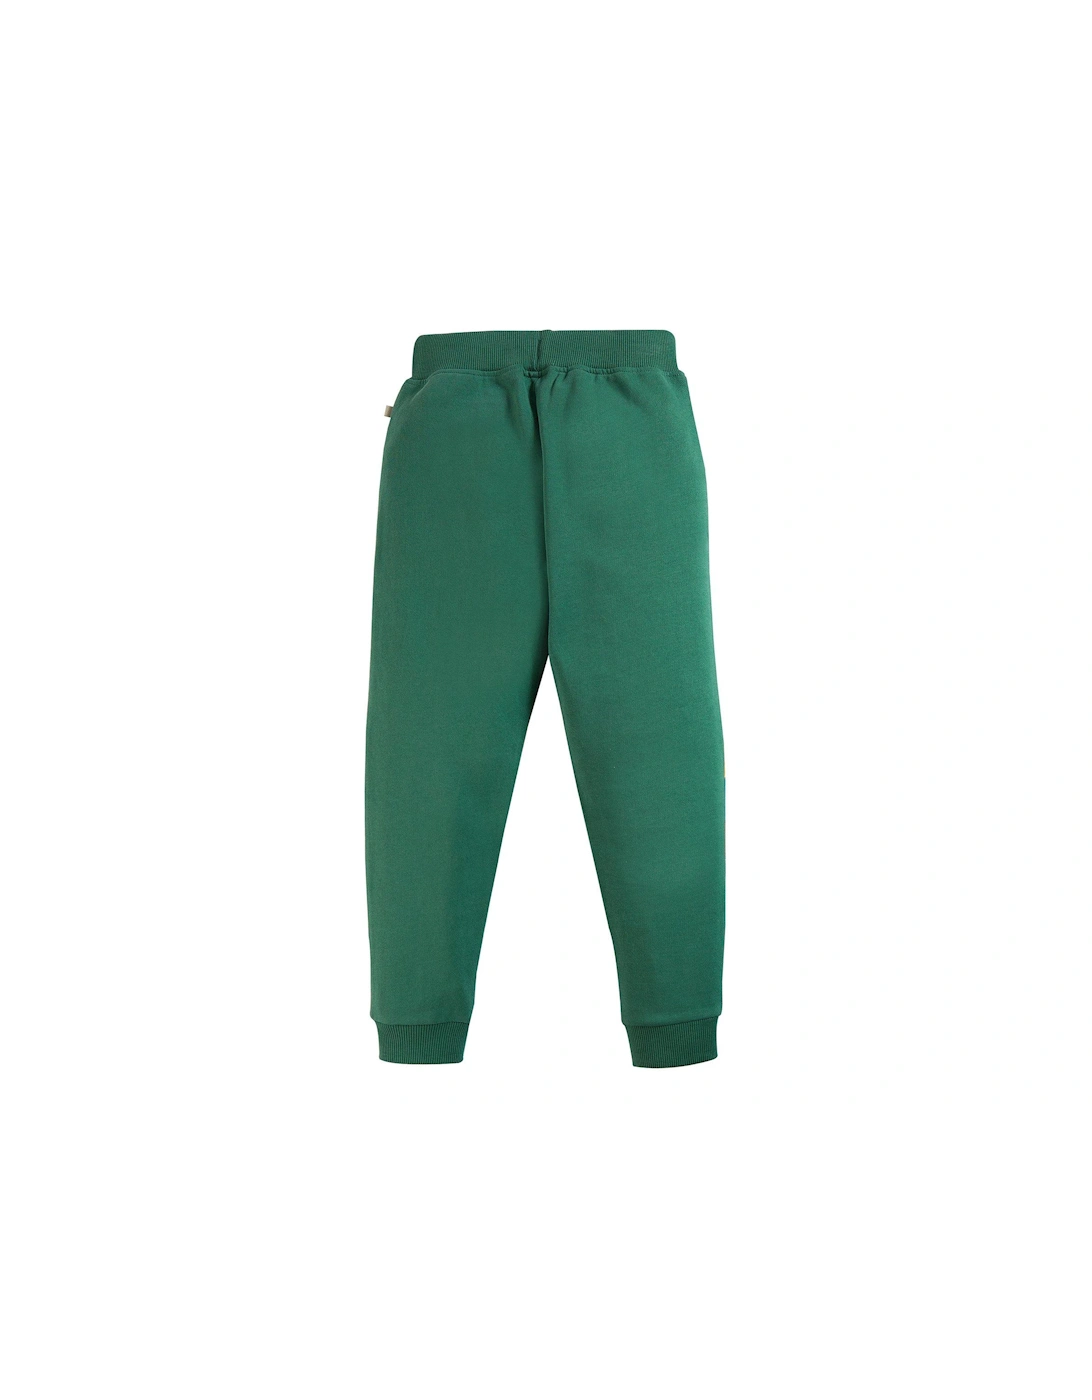 Boys Switch Kato Knee Patch Joggers - Green